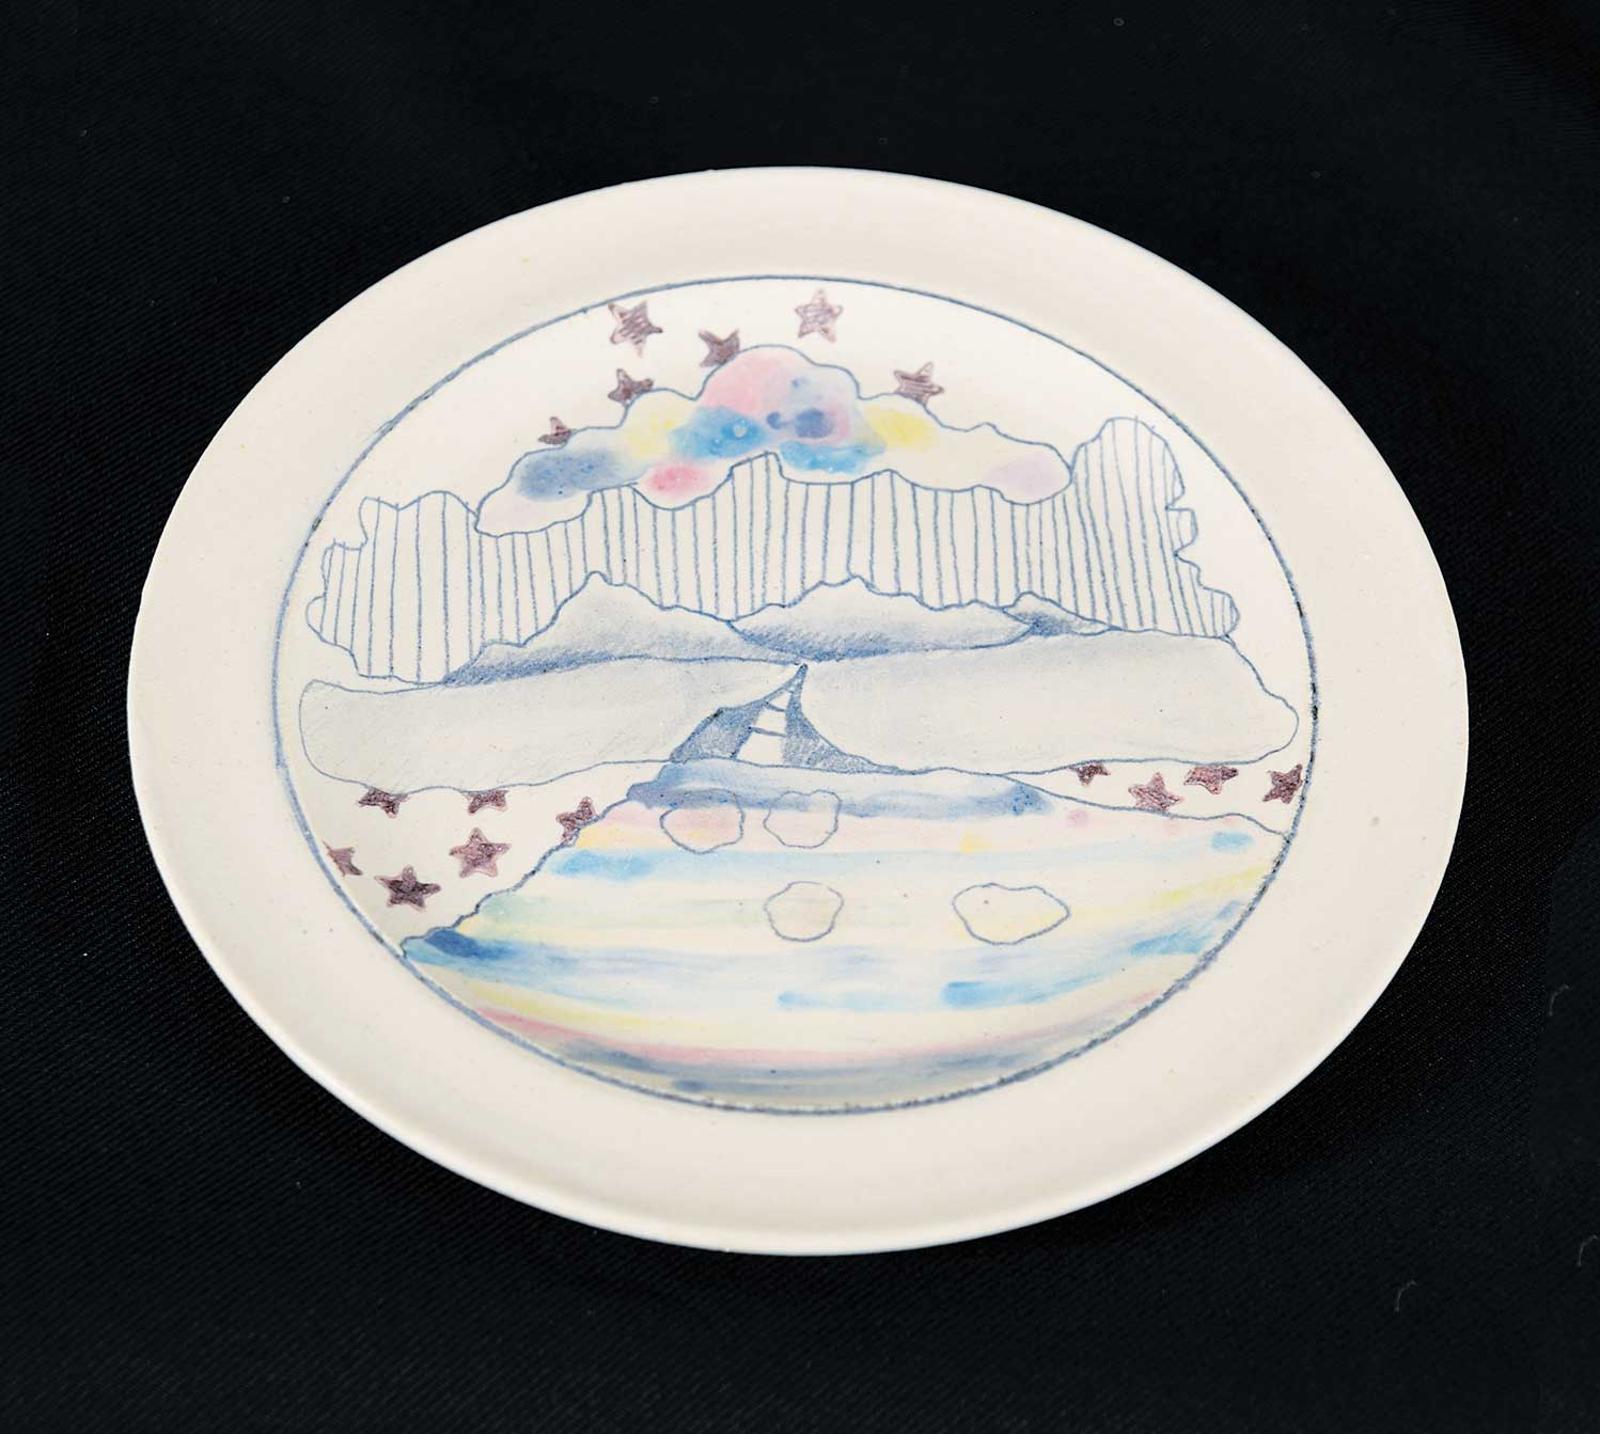 British Columbia School (1810) - Untitled - Painted Porcelain Plate